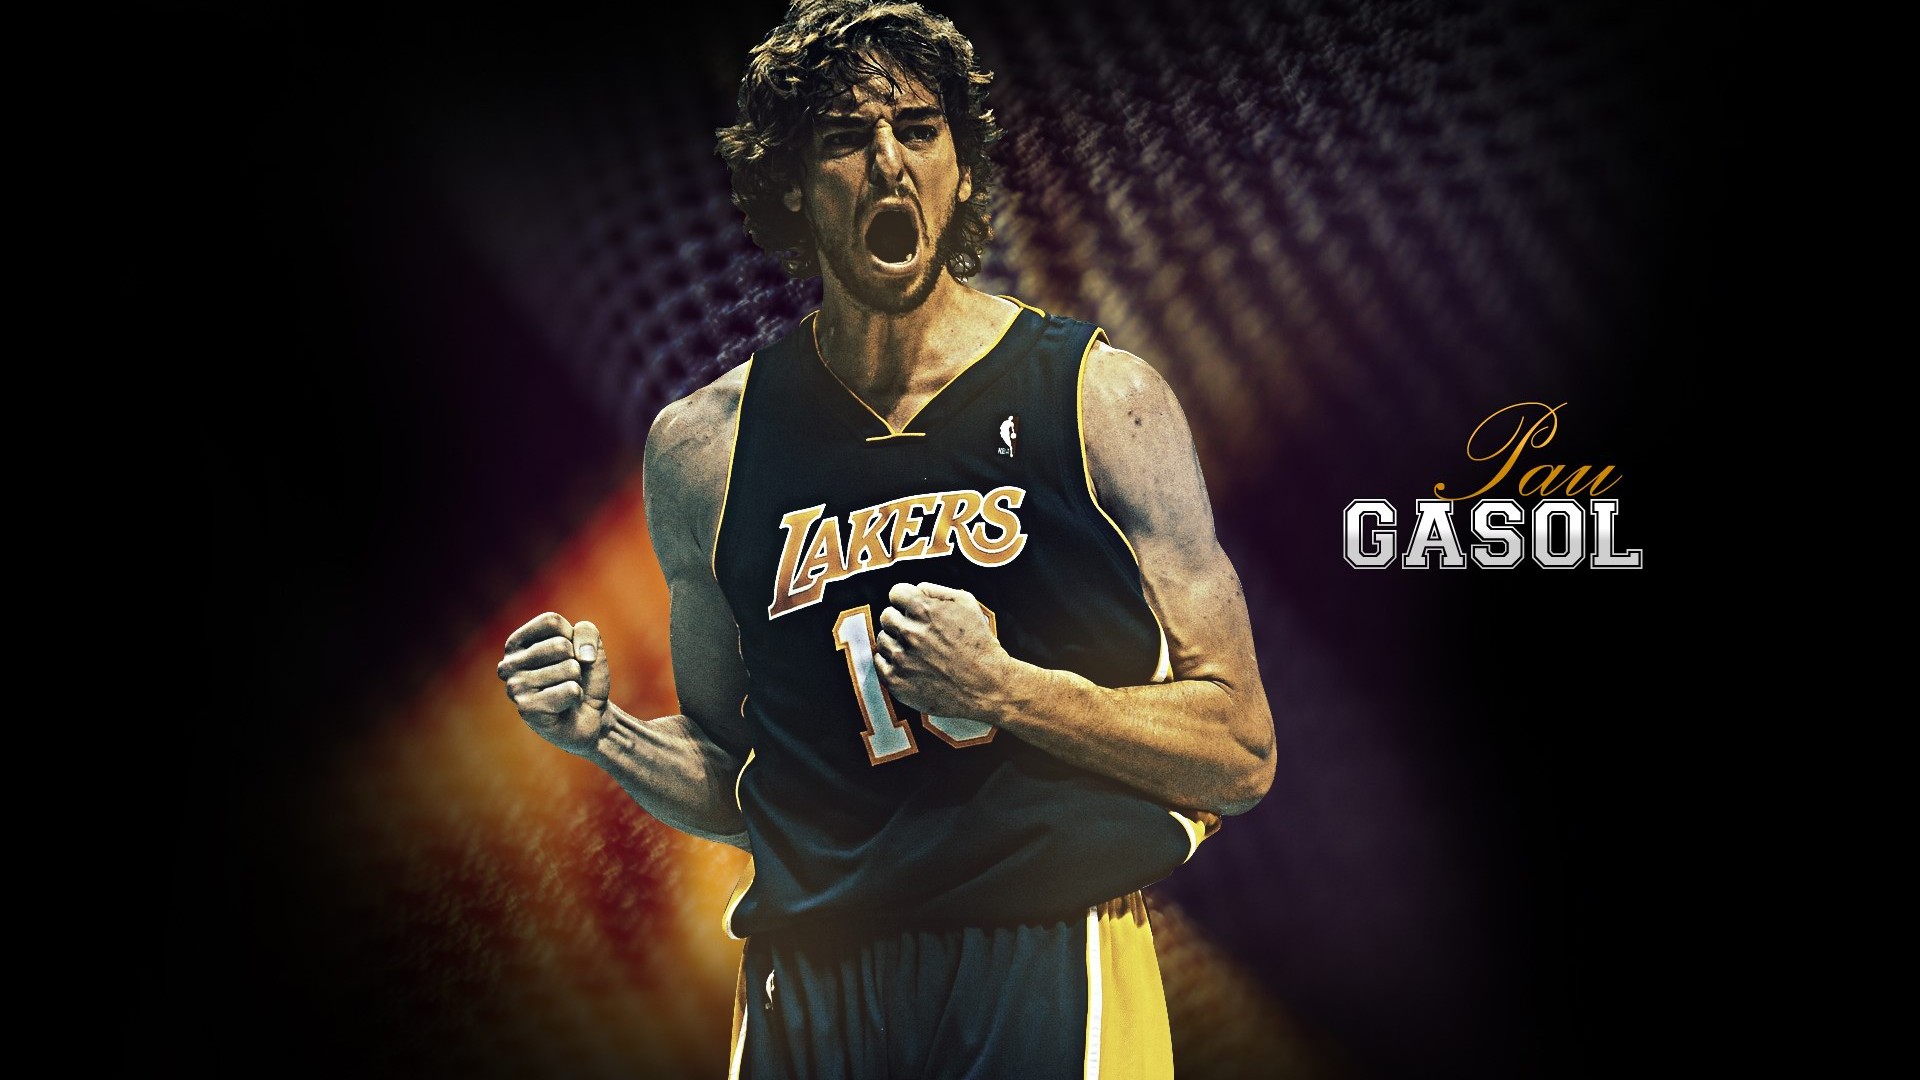 Los Angeles Lakers Wallpaper Oficial #20 - 1920x1080